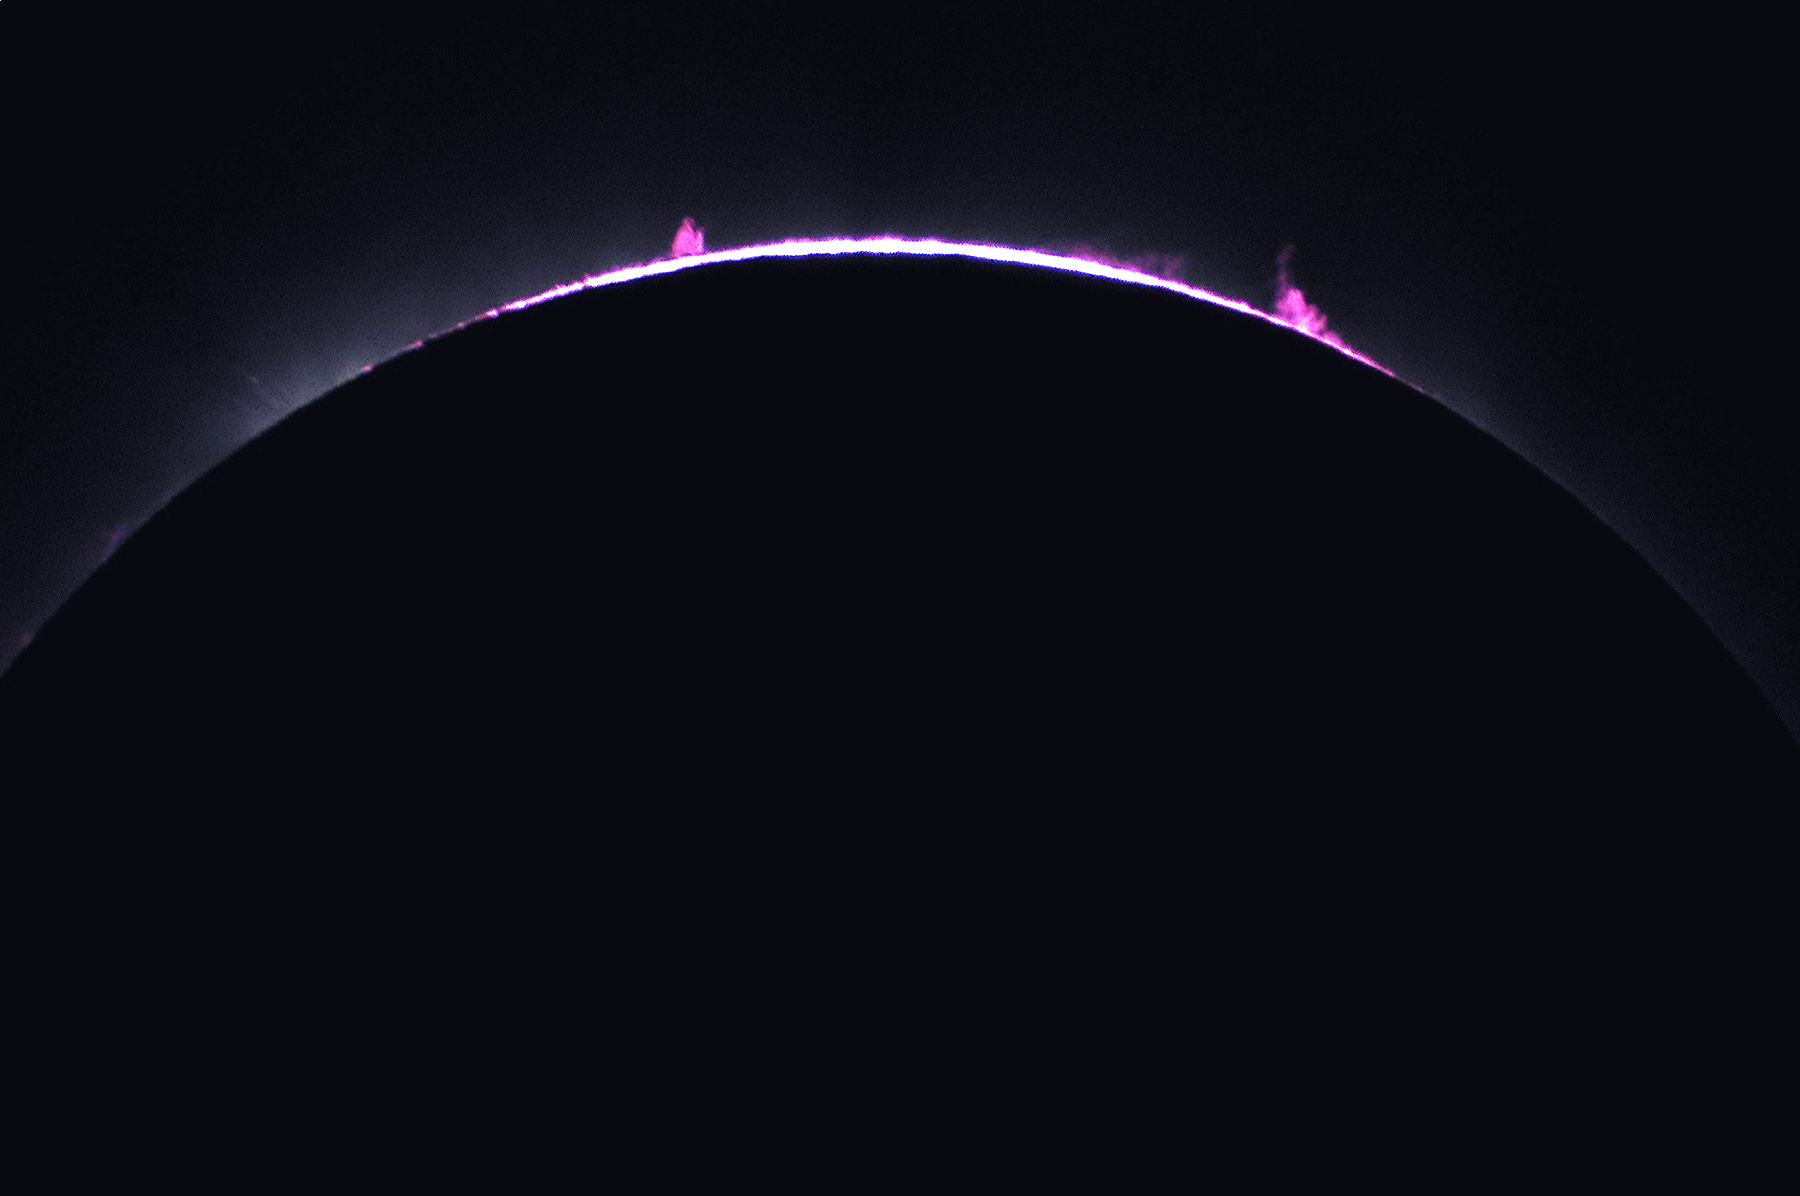 Eclipse 2017 - A42 - Solar Prominences at the Start of Totality